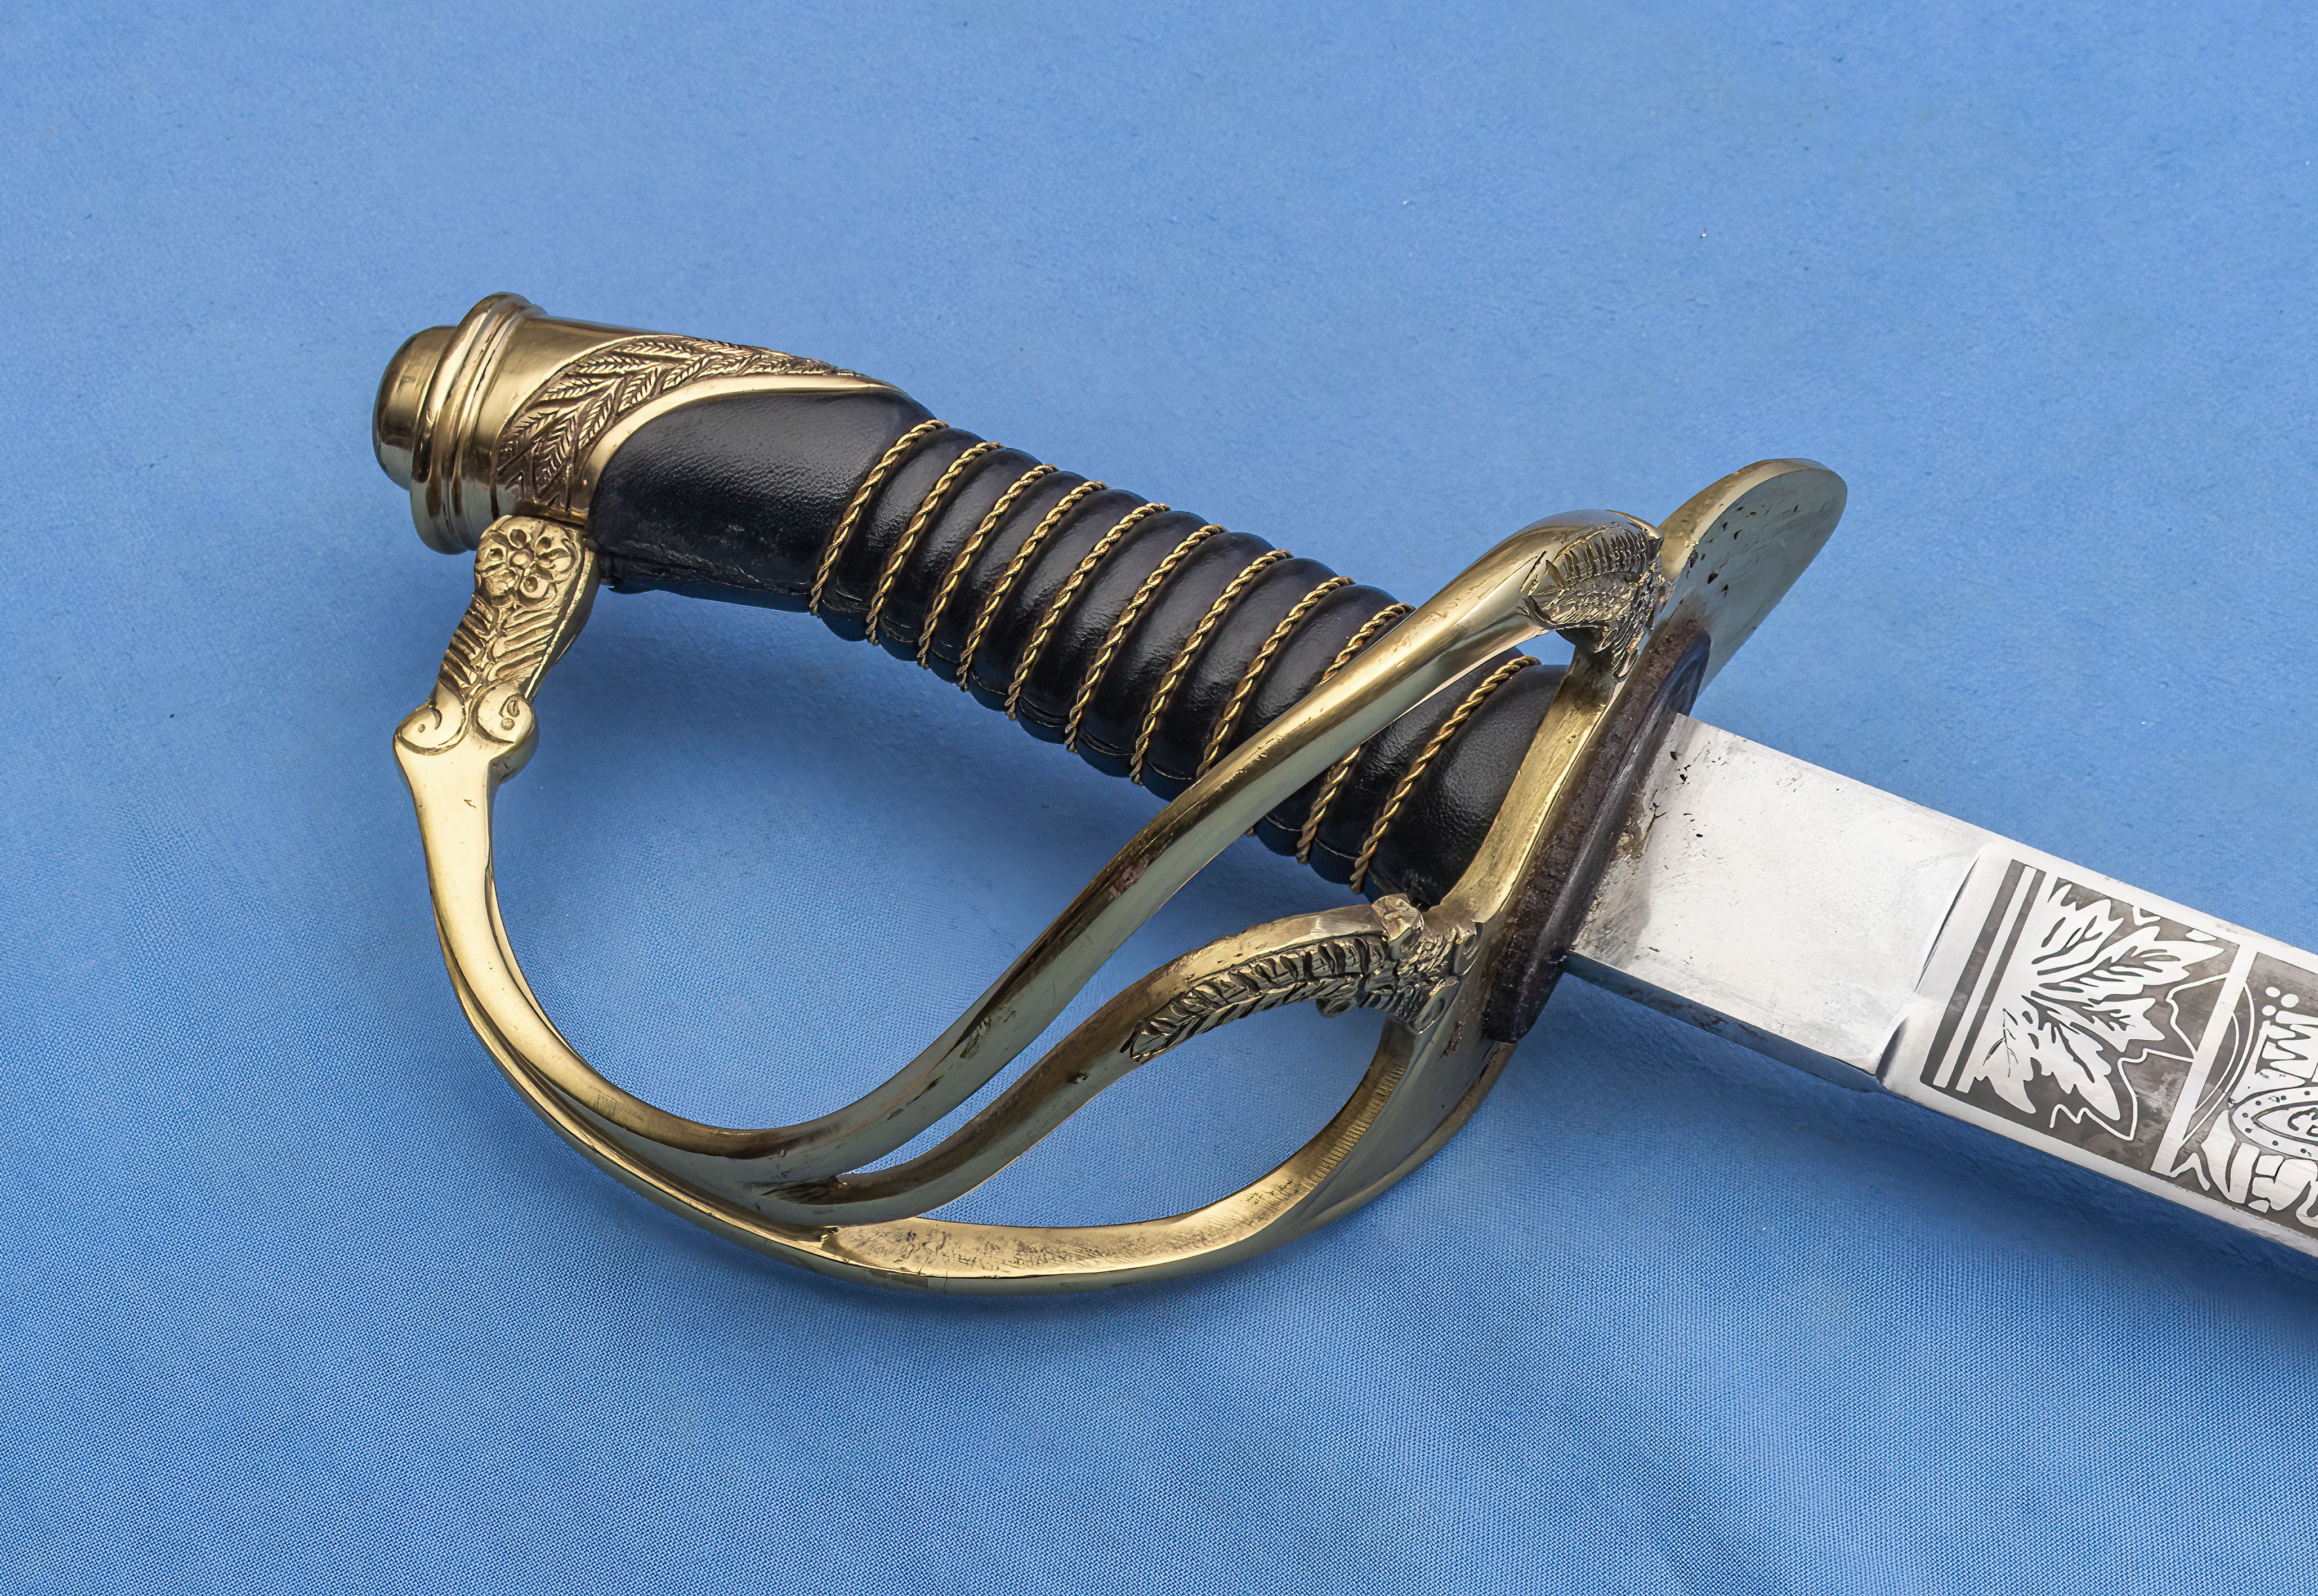 Replica American 1860 cavalry officers sabre - Image 5 of 5